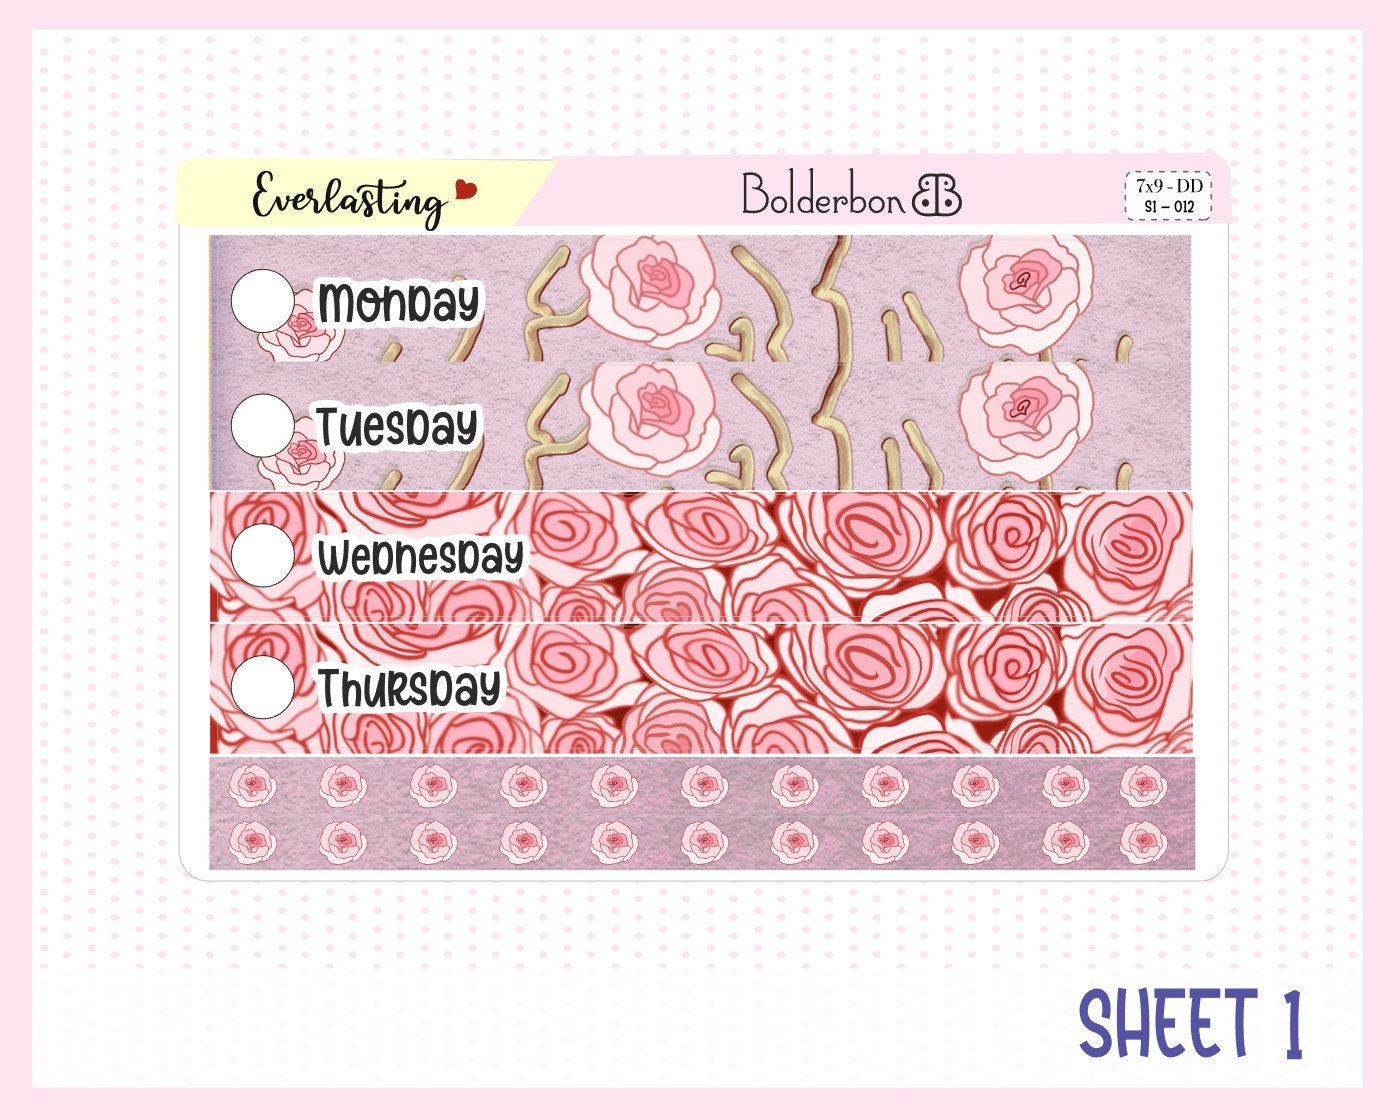 EVERLASTING "7x9 Daily Duo" || Weekly Planner Sticker Kit for Erin Condren